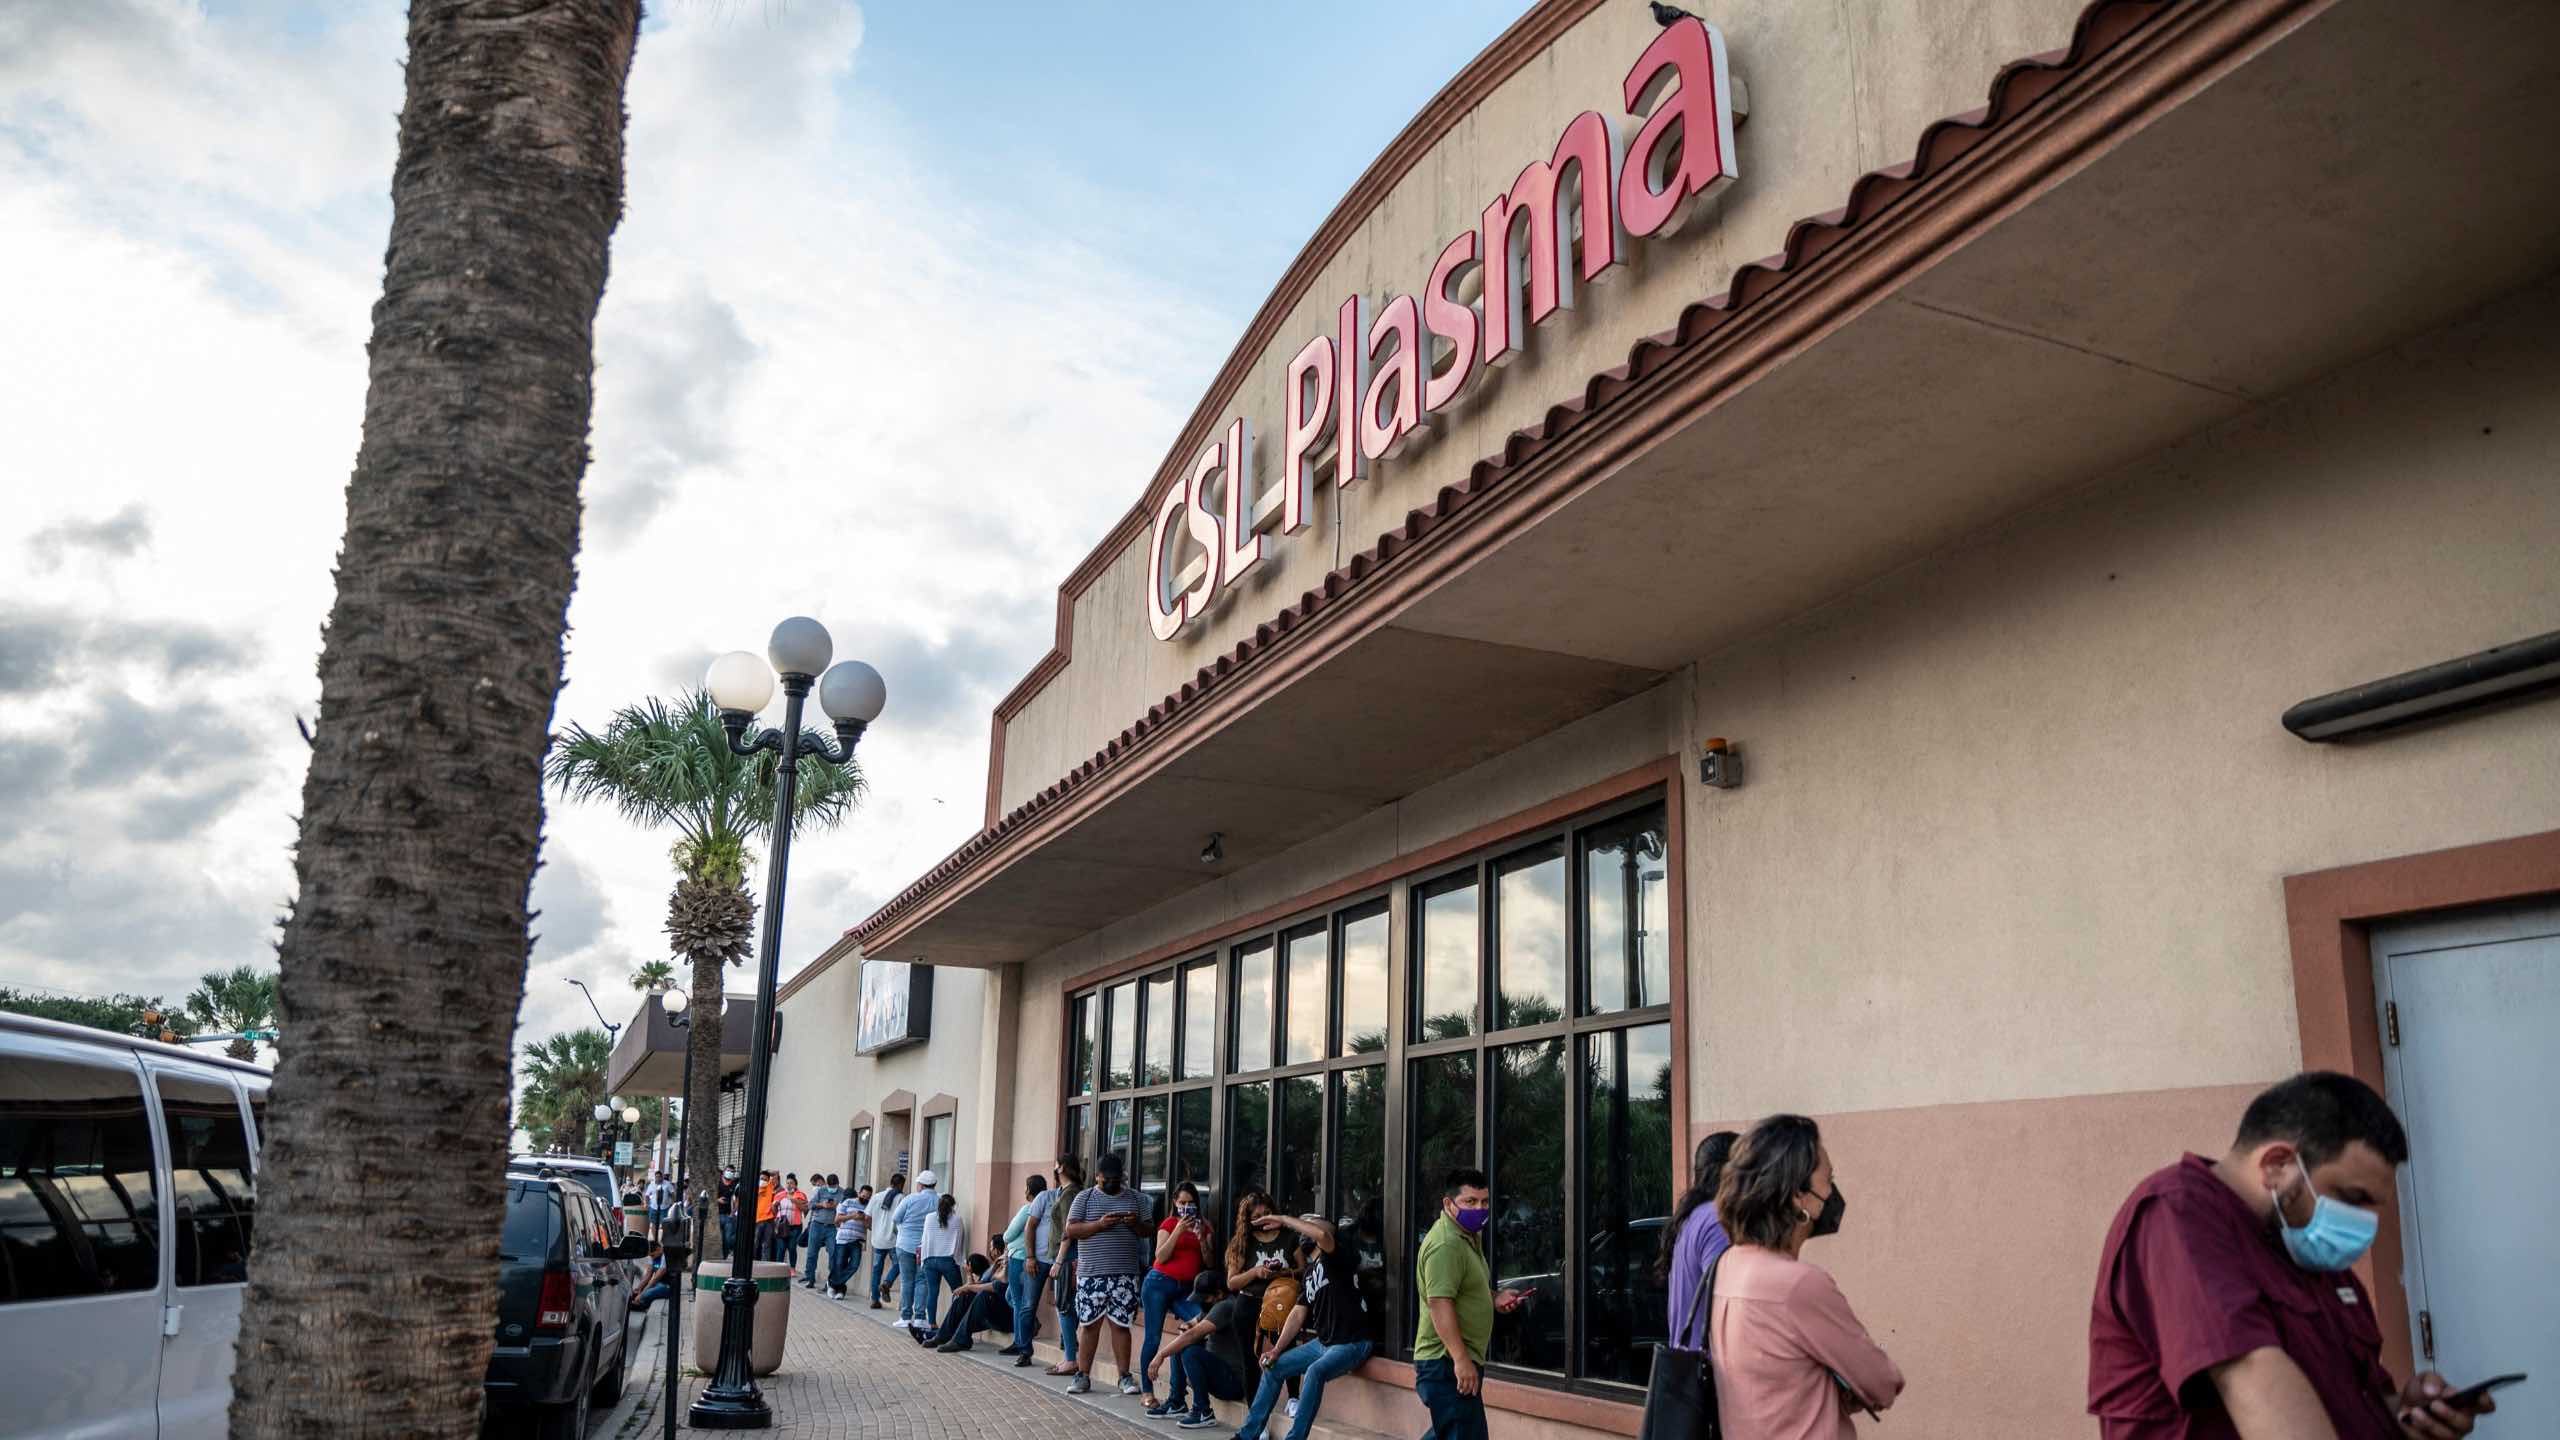 People wait in line at CSL Plasma in Brownsville, Texas, on May 25, 2021. On June 14, 2021, Customs and Border Protection sent out “clarifying guidance” that selling plasma on a visitor visa was not allowed.